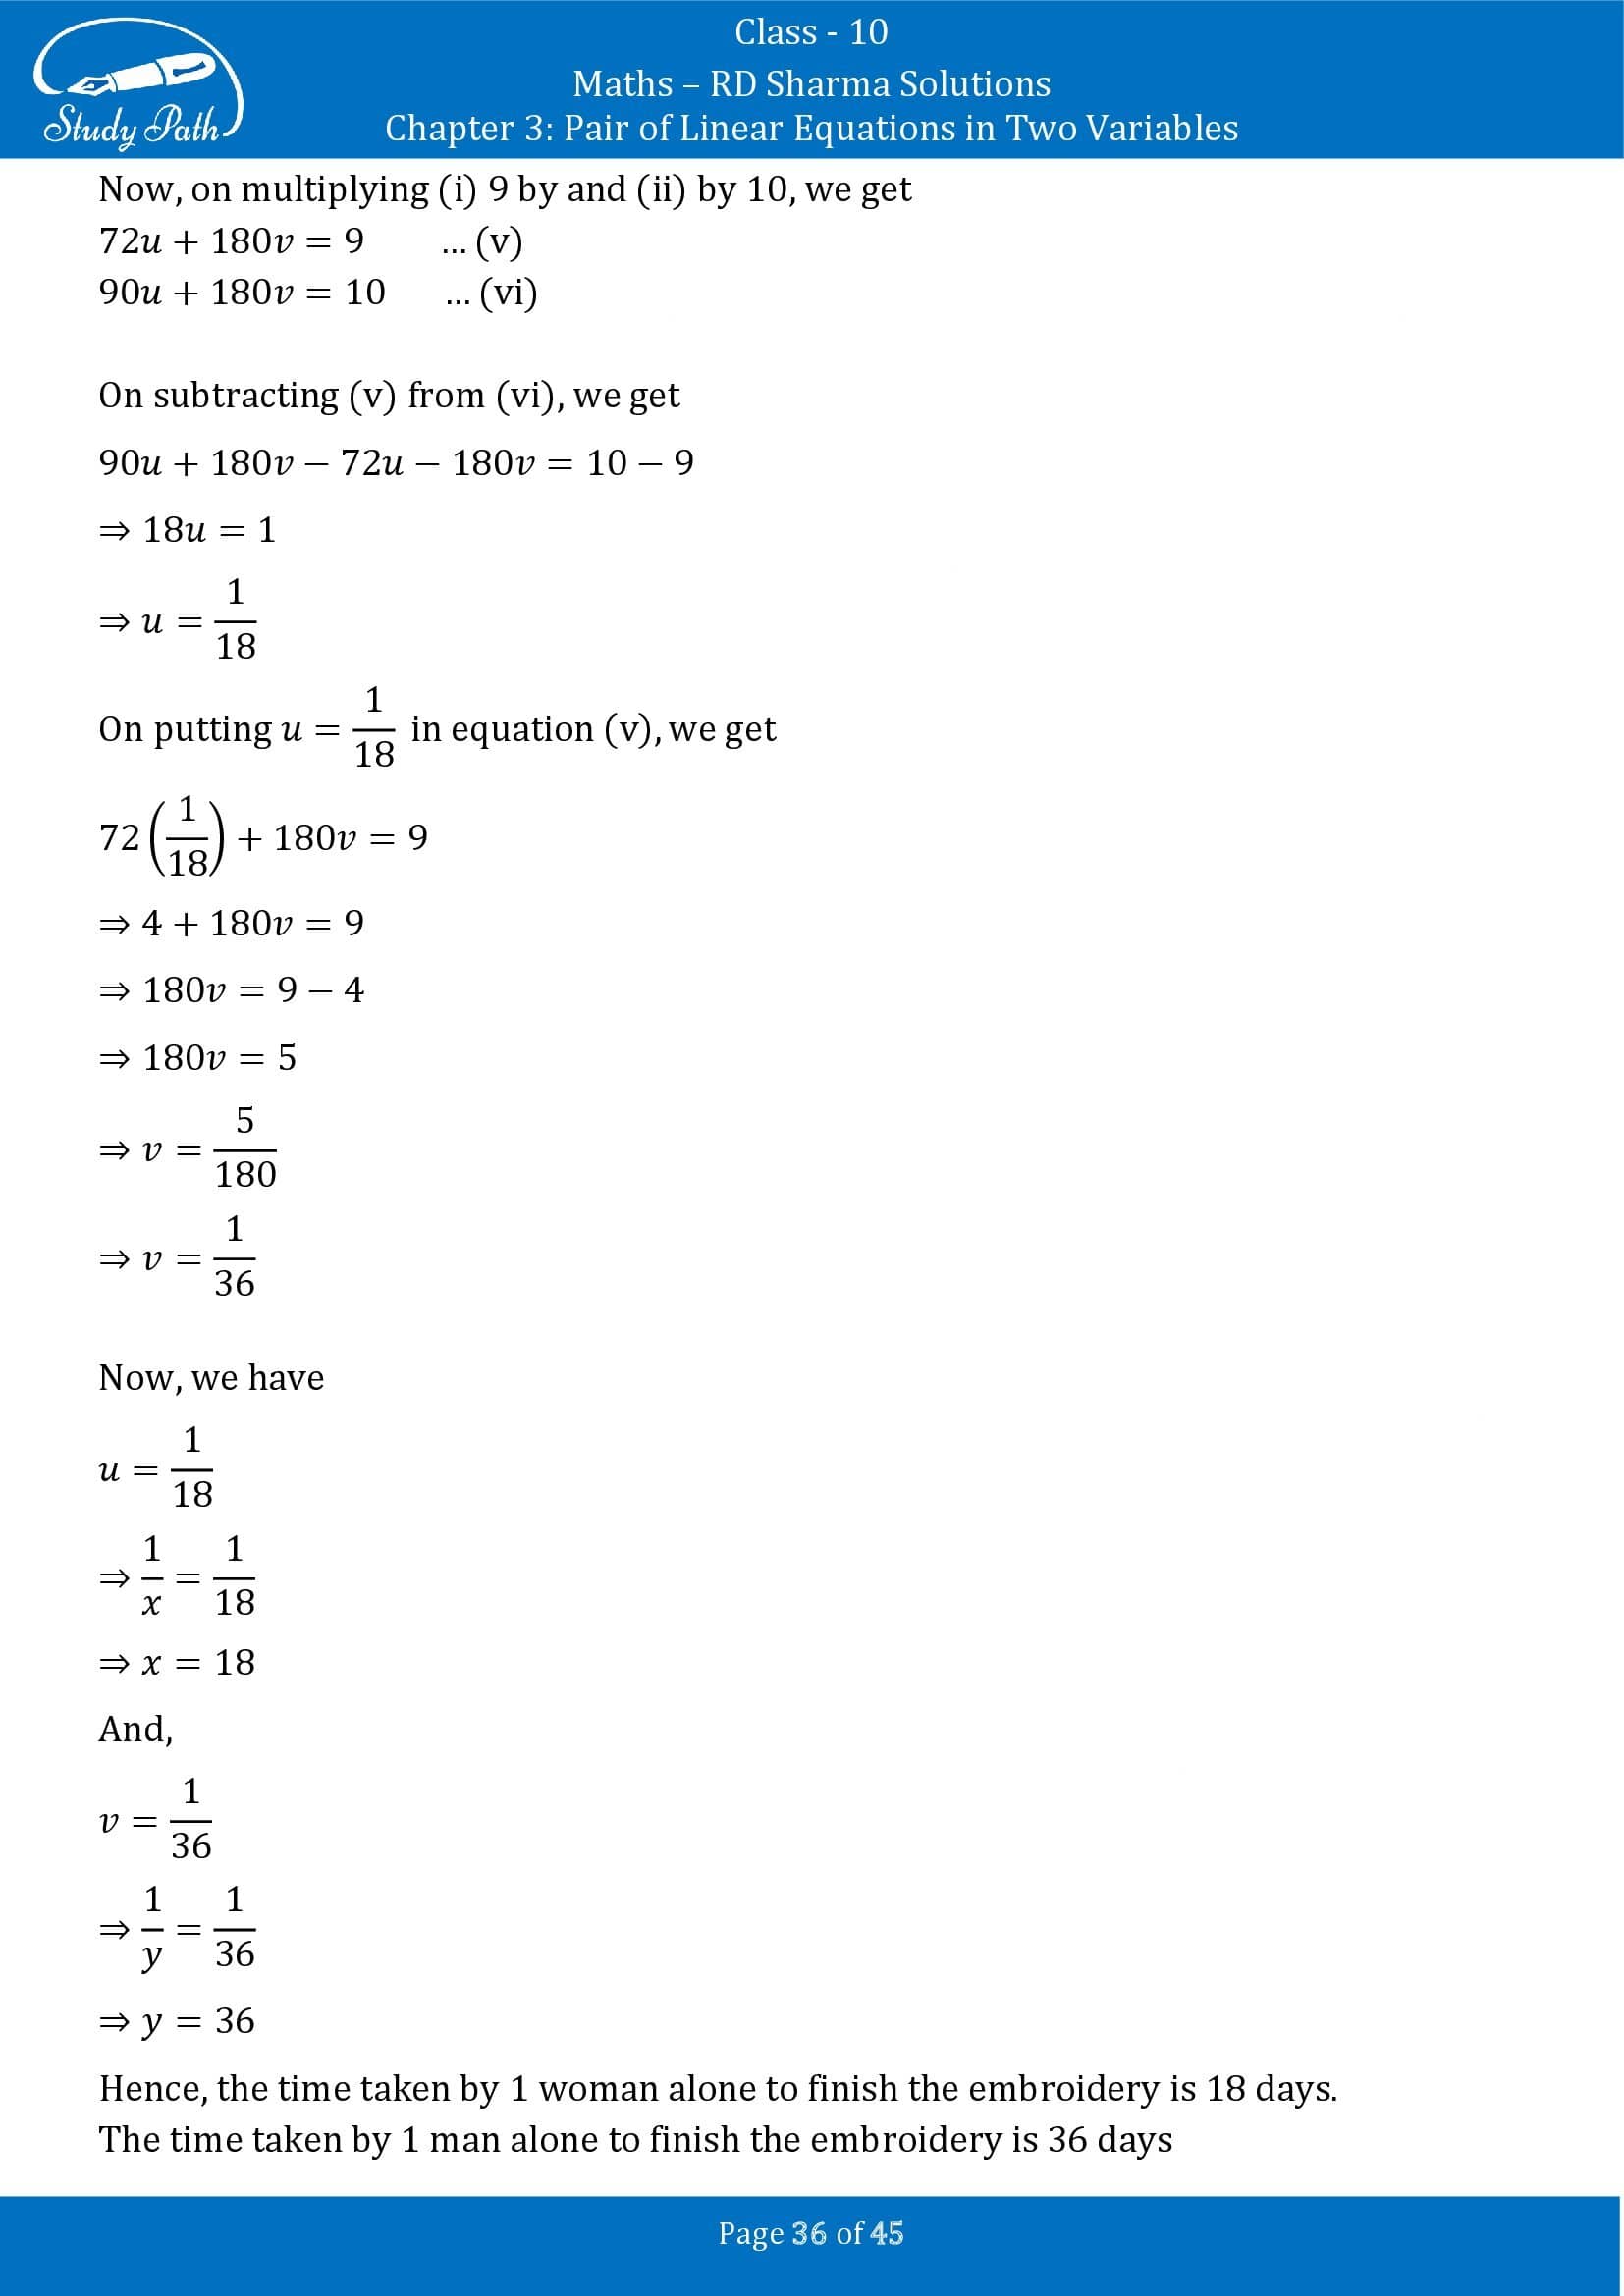 RD Sharma Solutions Class 10 Chapter 3 Pair of Linear Equations in Two Variables Exercise 3.11 00036